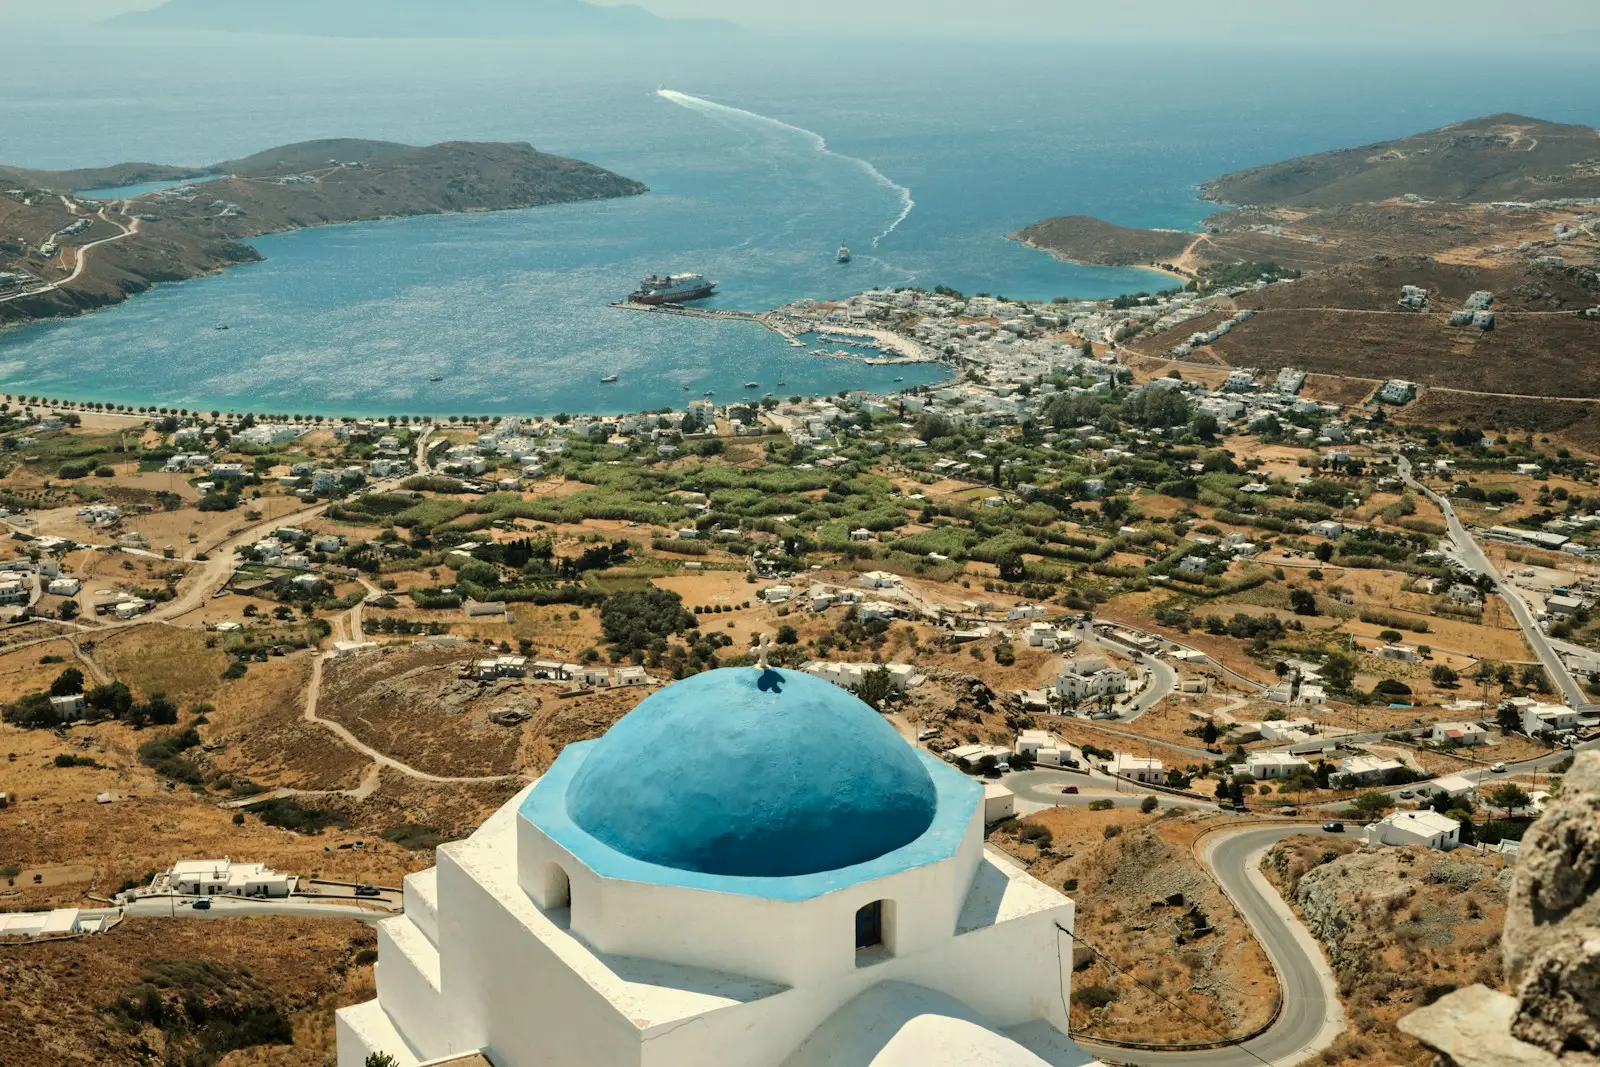 a white building with a blue dome and a blue dome on a hill overlooking a city and water